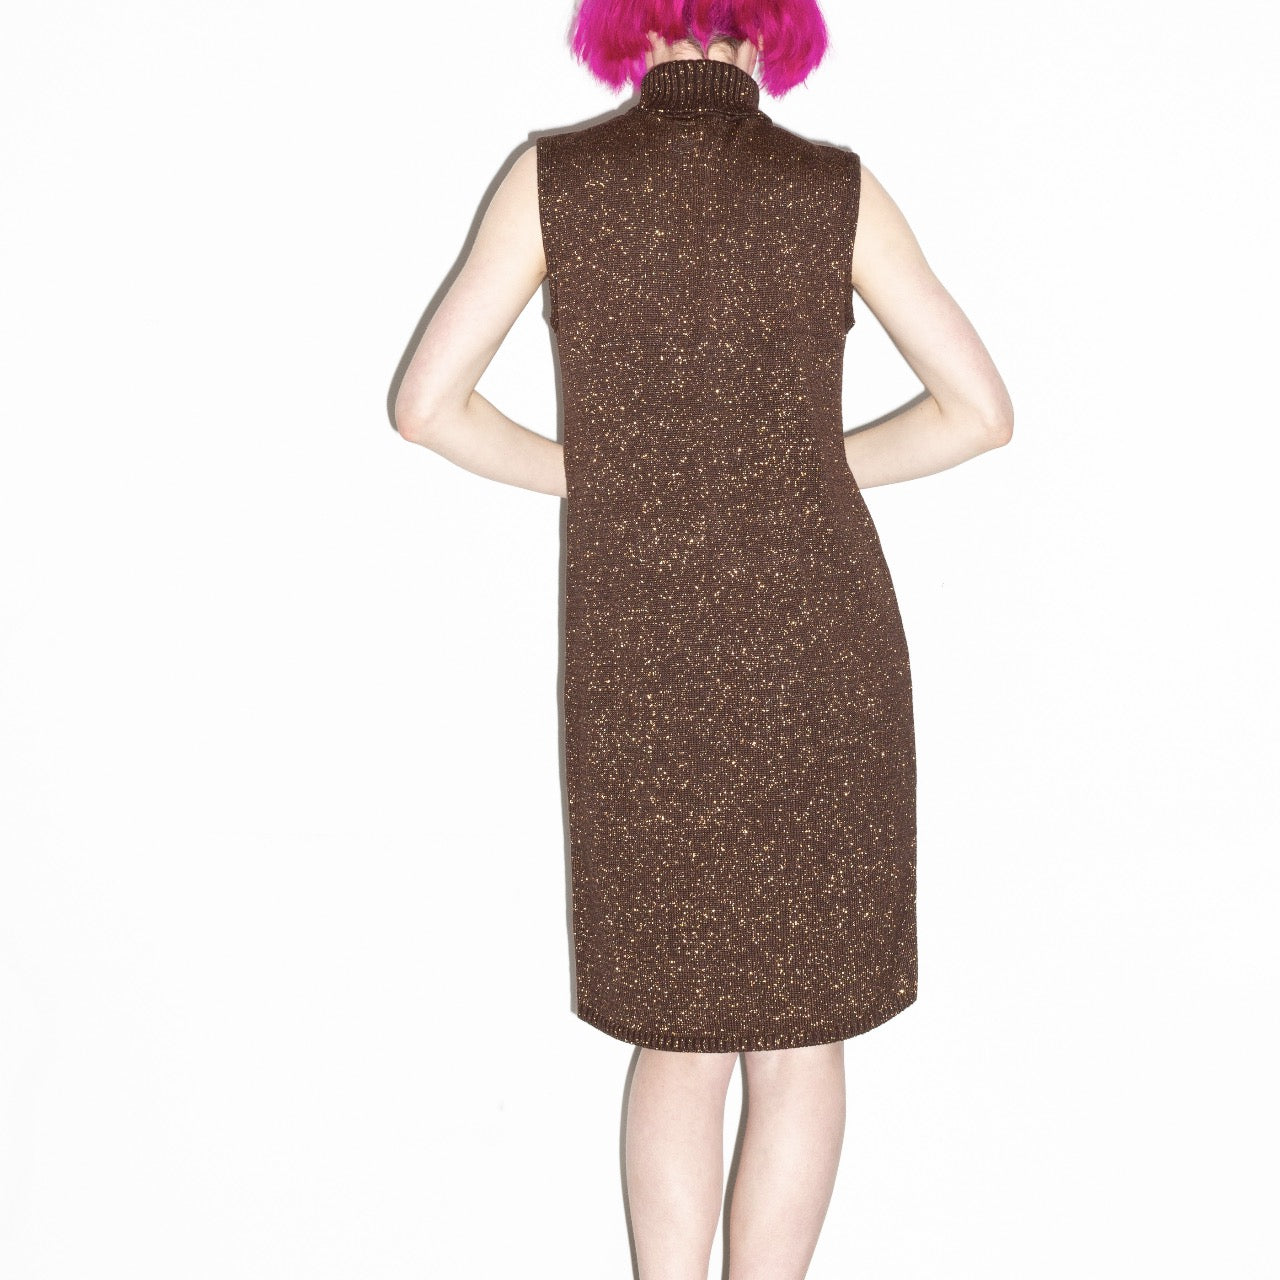 Vintage Brown and Gold Sleeveless Turtleneck Sweater Dress